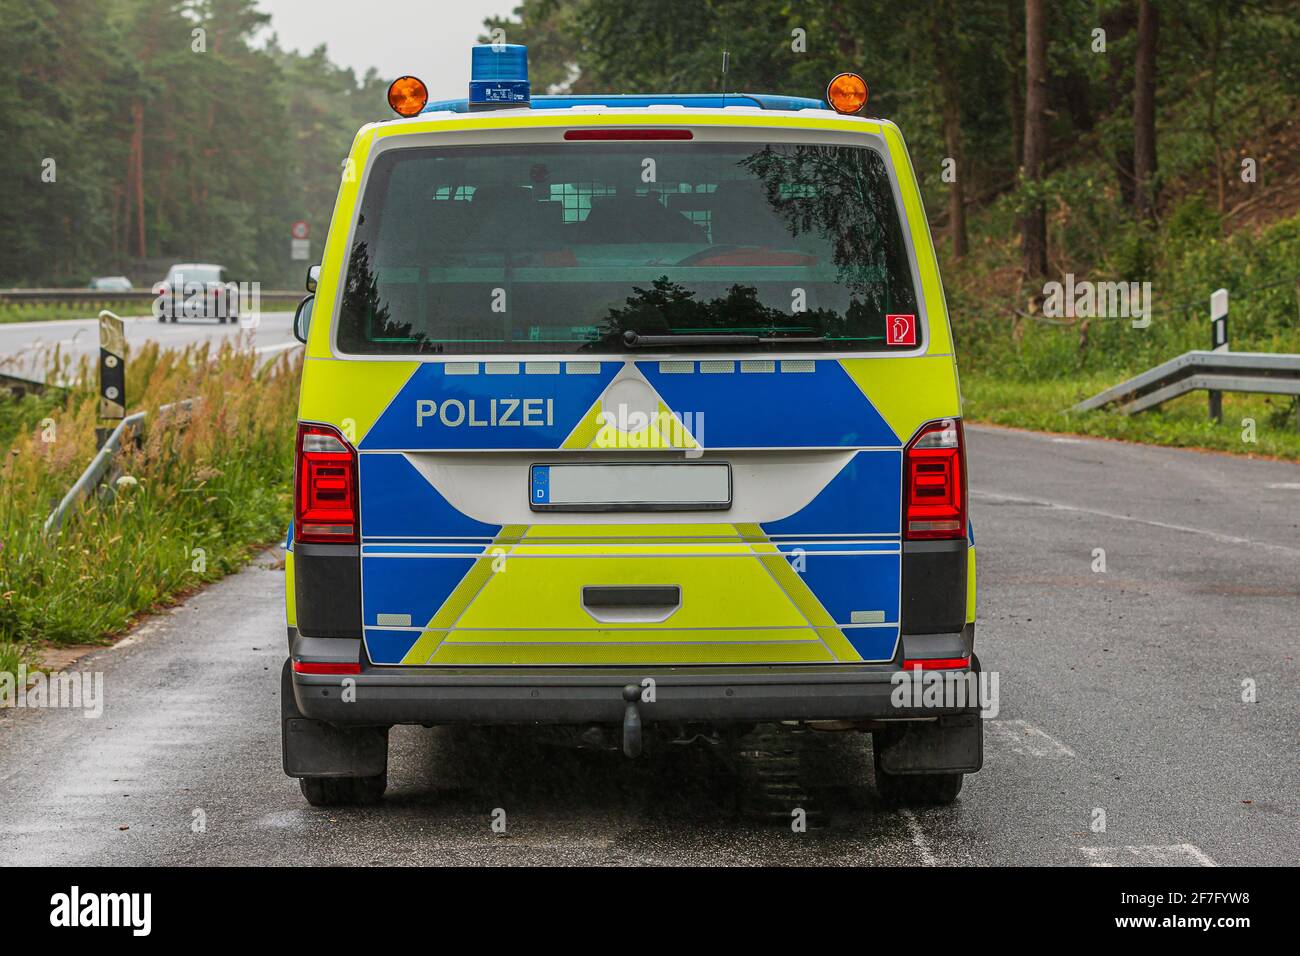 Rear view of a radio patrol car from the Brandenburg motorway in an emergency stopping bay. Police car in yellow and blue paintwork on a wet road. Stock Photo